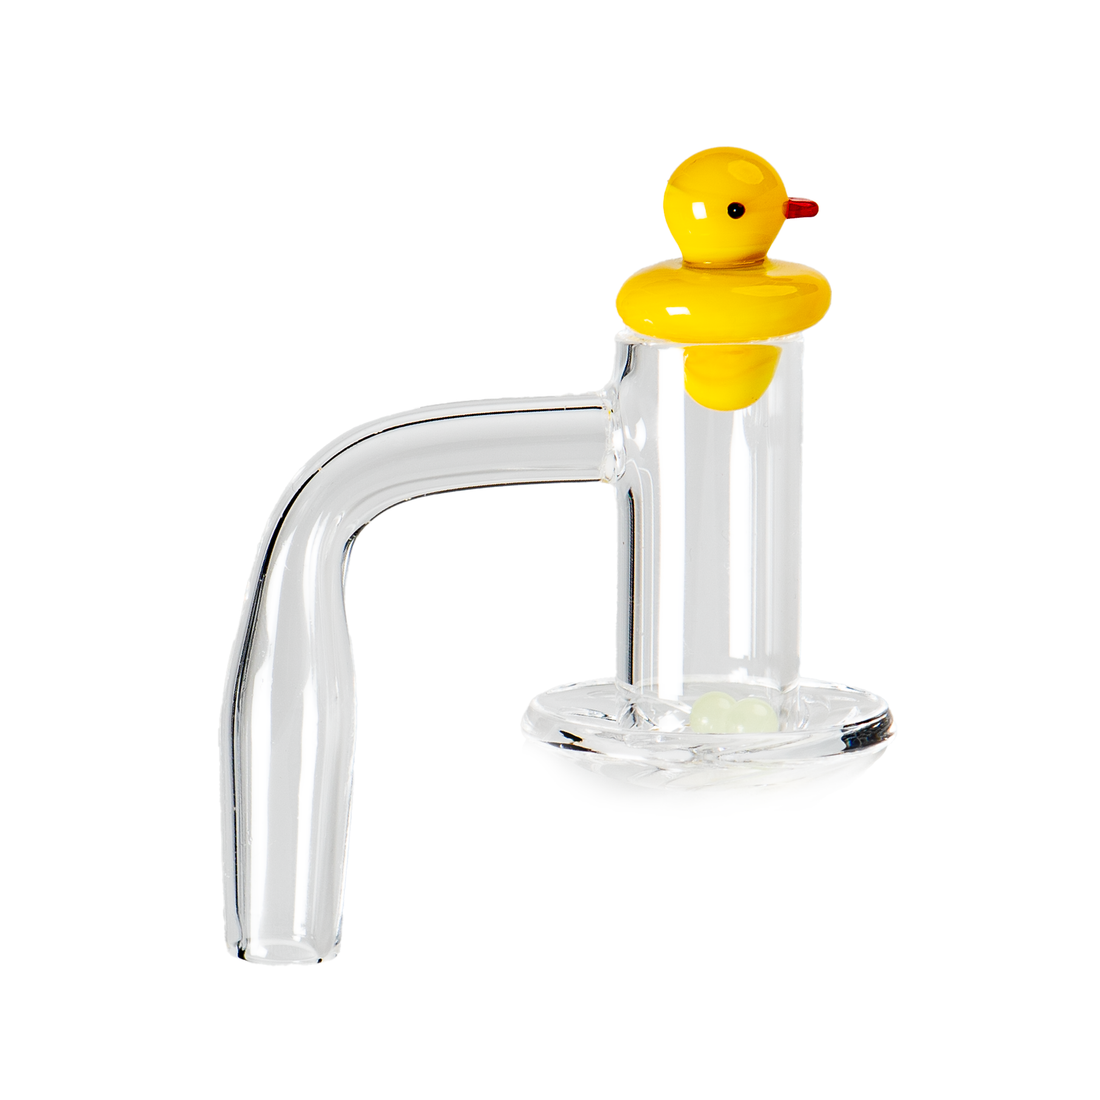 Male Terp Blender With Duck Cap - 14mm